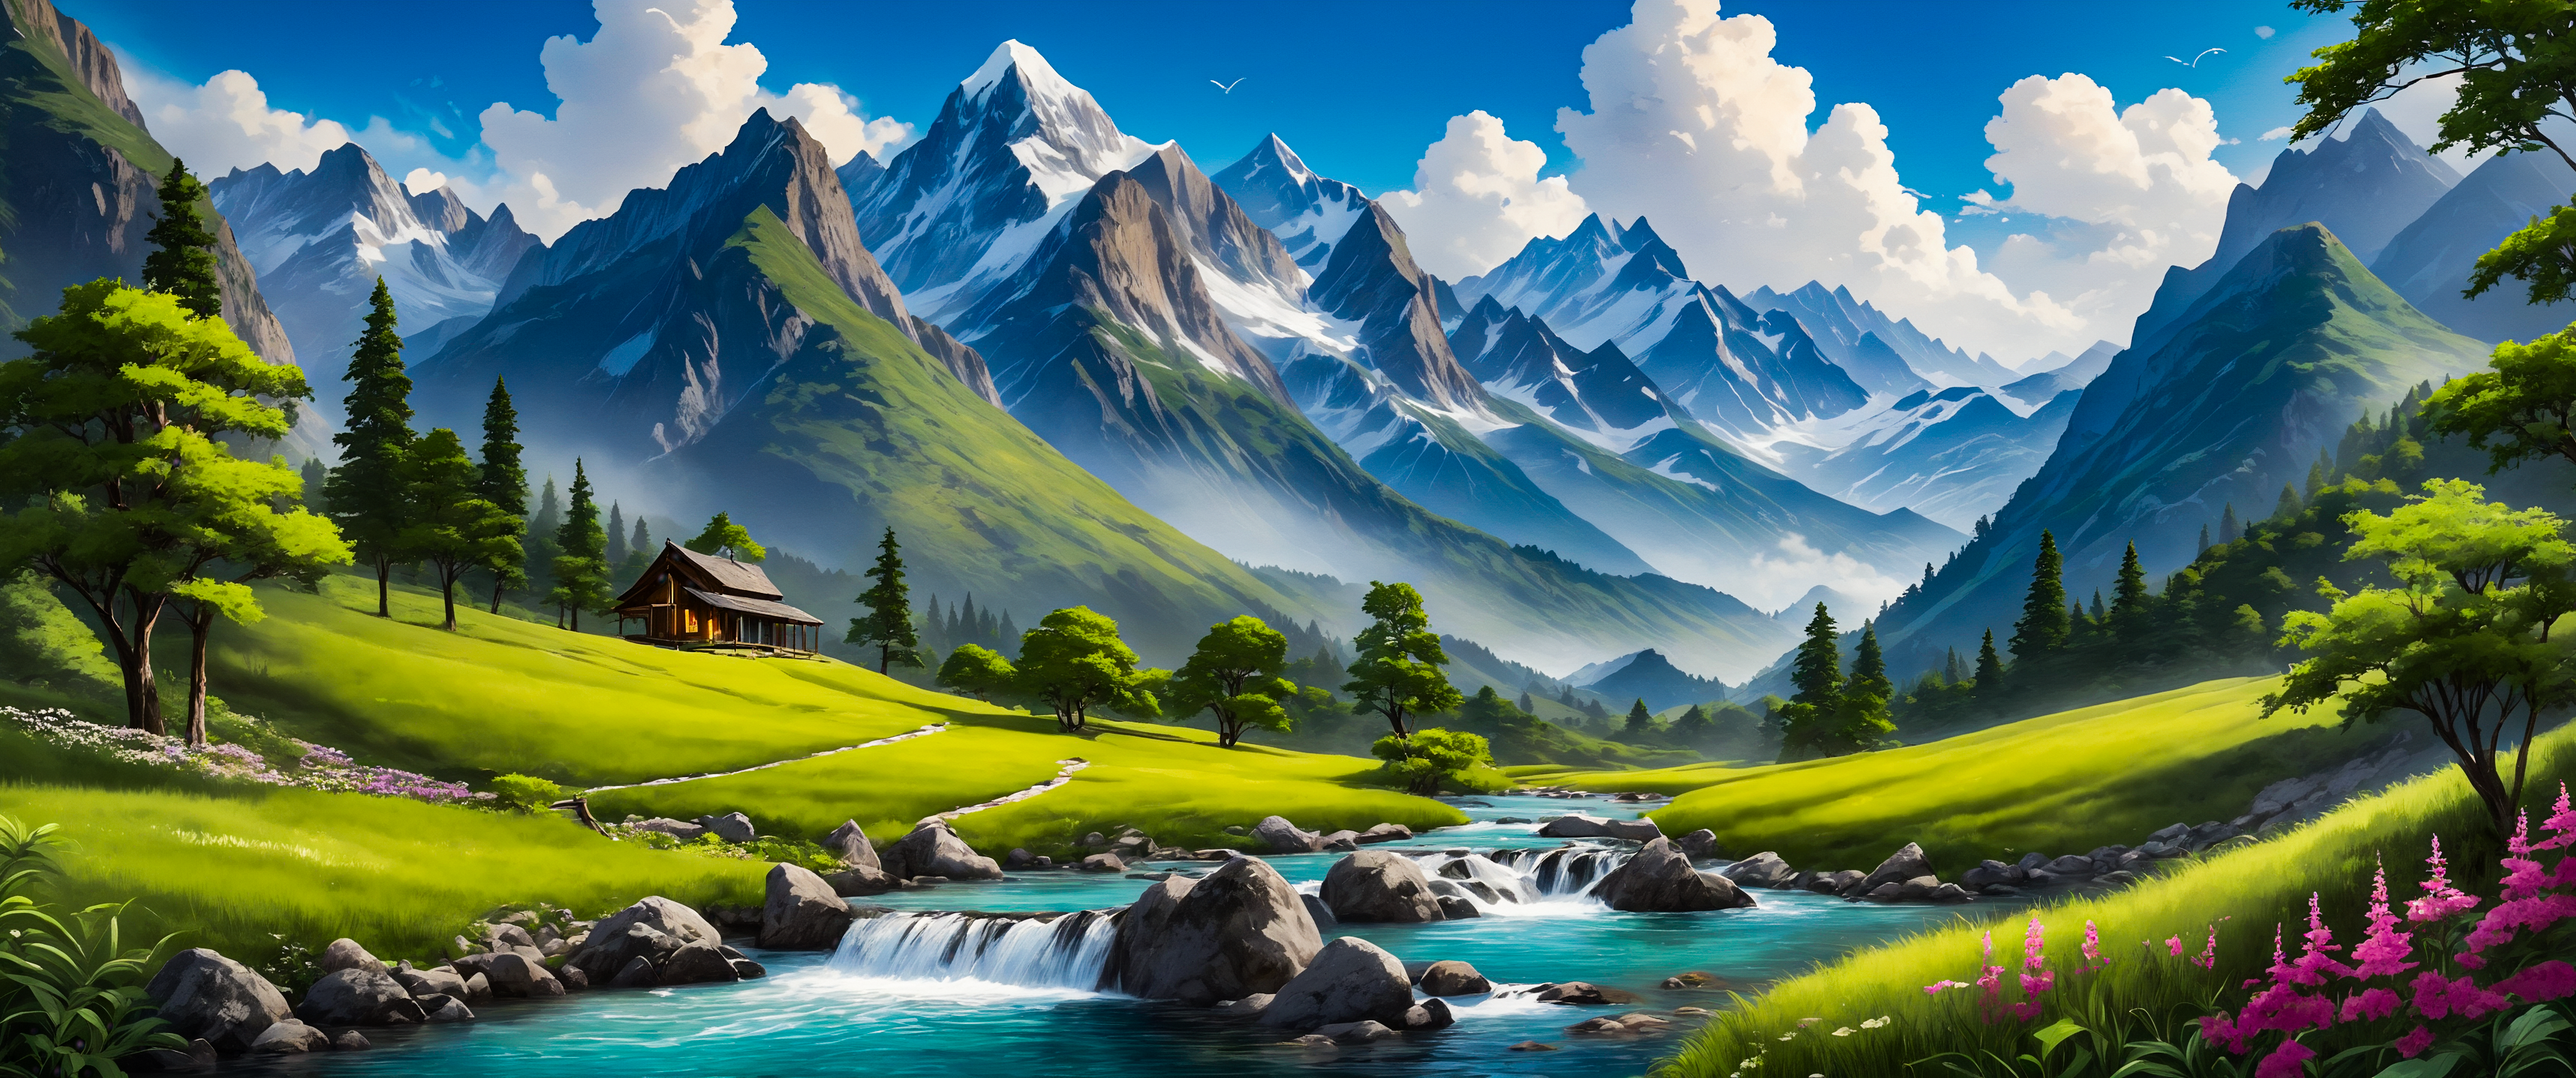 General 3440x1440 AI art landscape river water sky clouds trees rocks digital art mountains snowy mountain nature flowers leaves snow